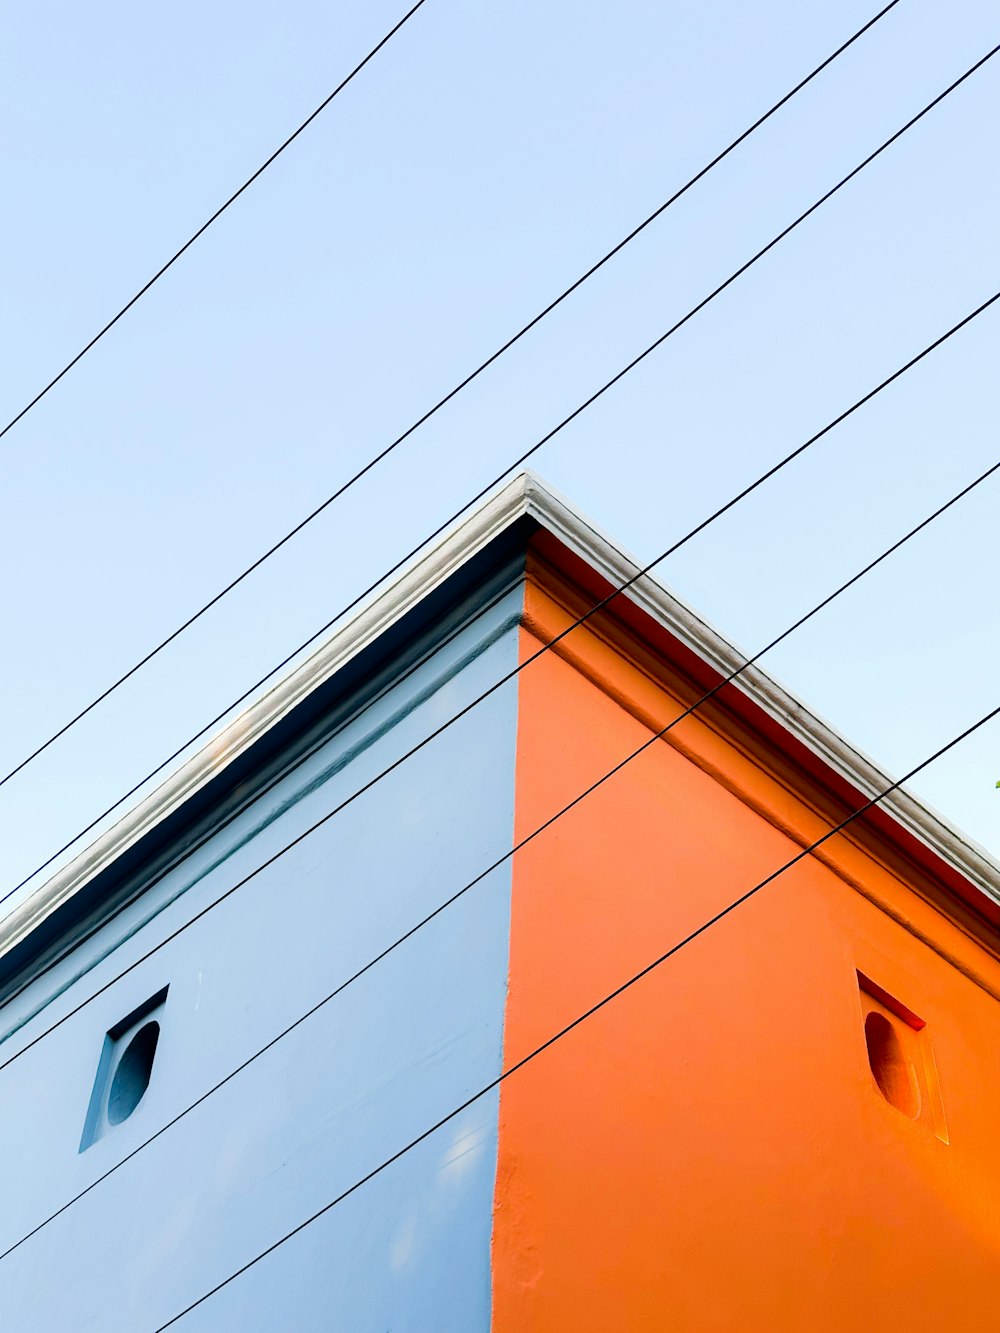 an orange and blue building with power lines in the background